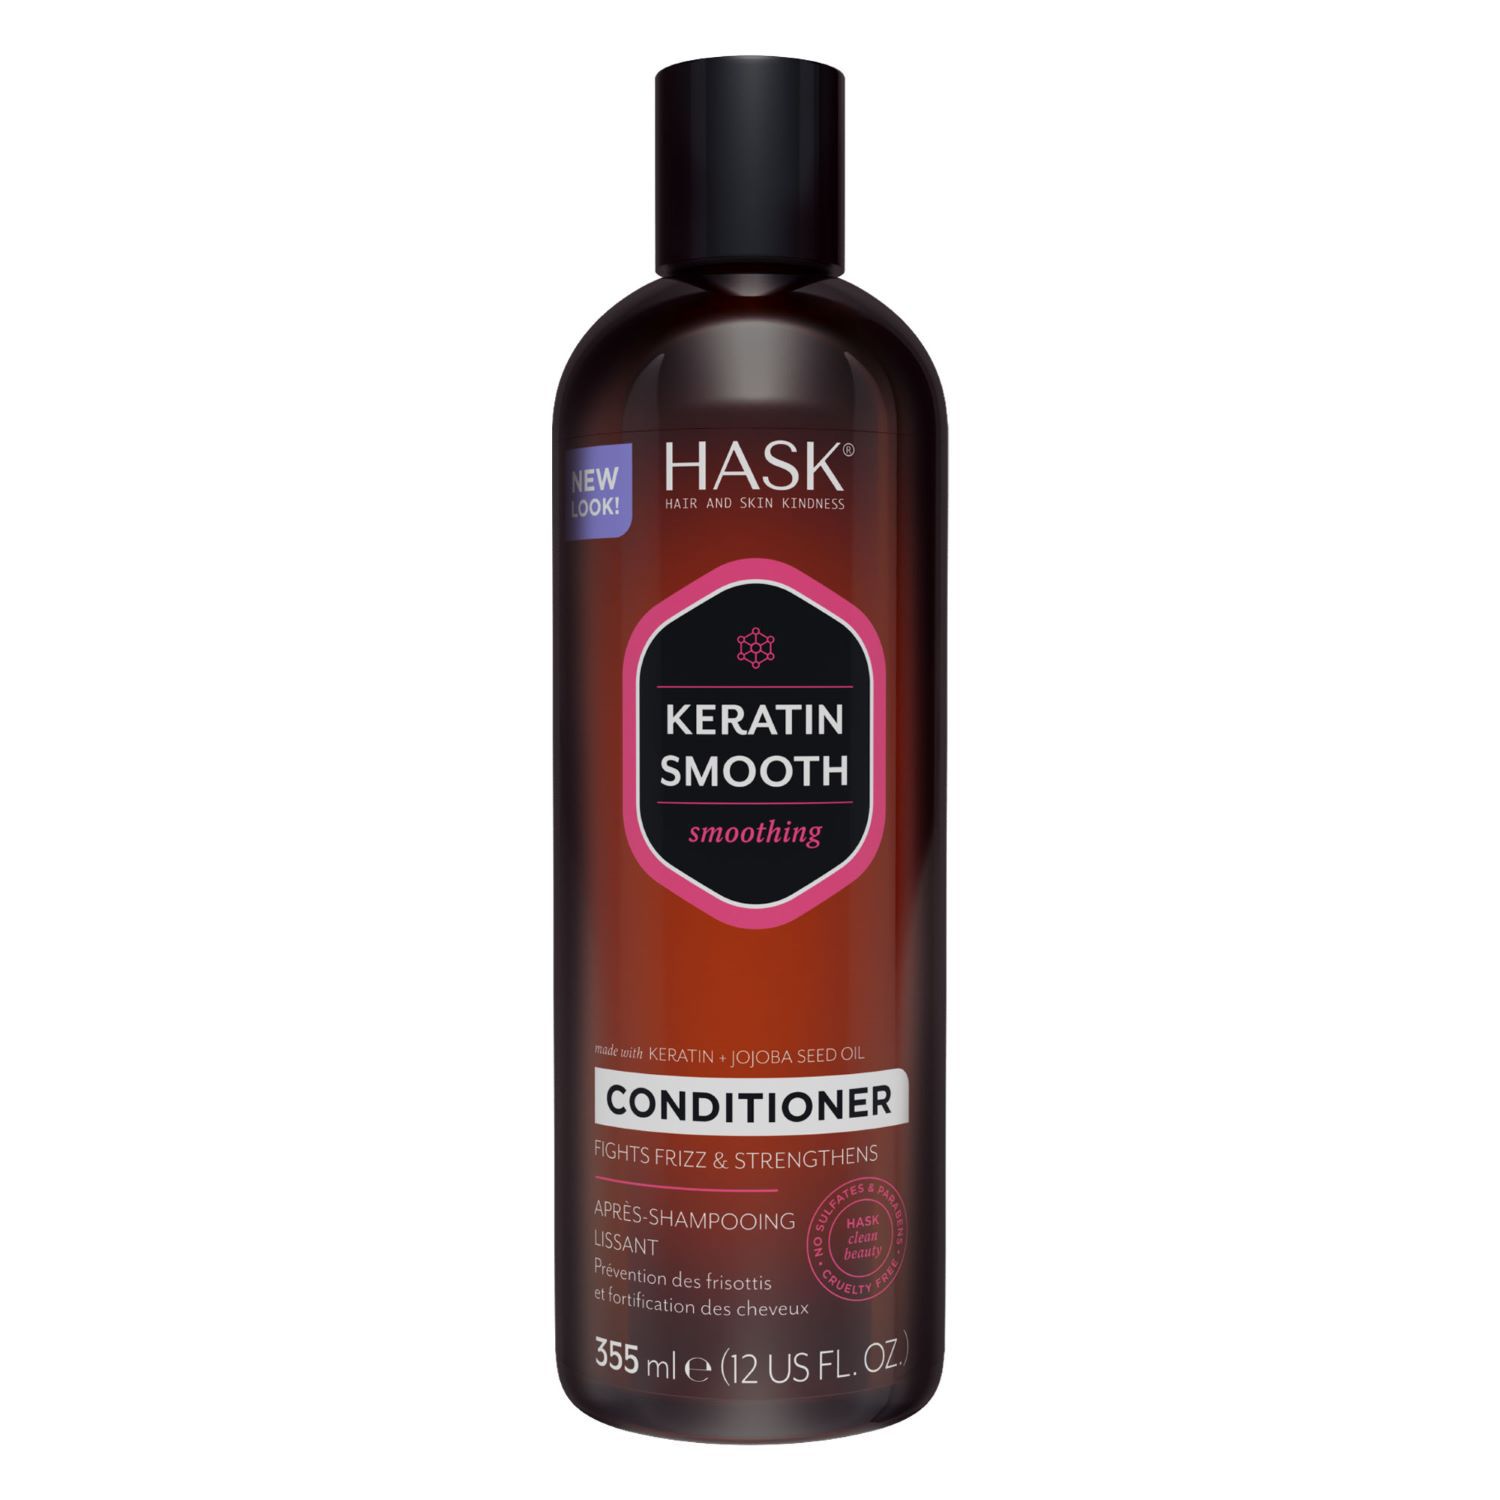 HASK Keratin Smooth Smoothing Conditioner, 12 OZ